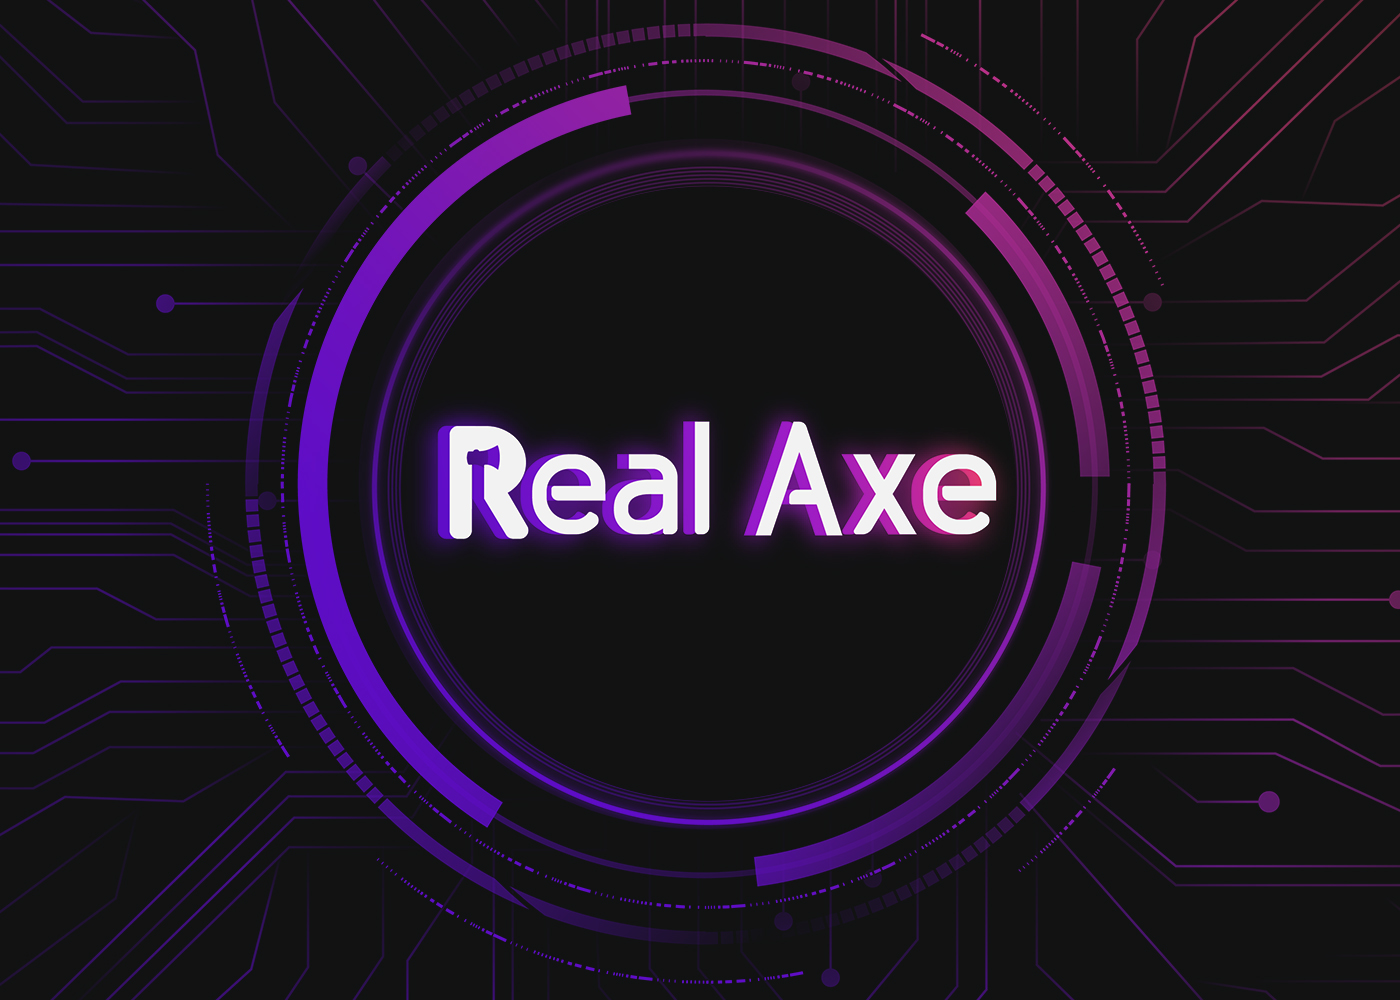 Real Axe is the Visionary Pioneers of Experiential Technology